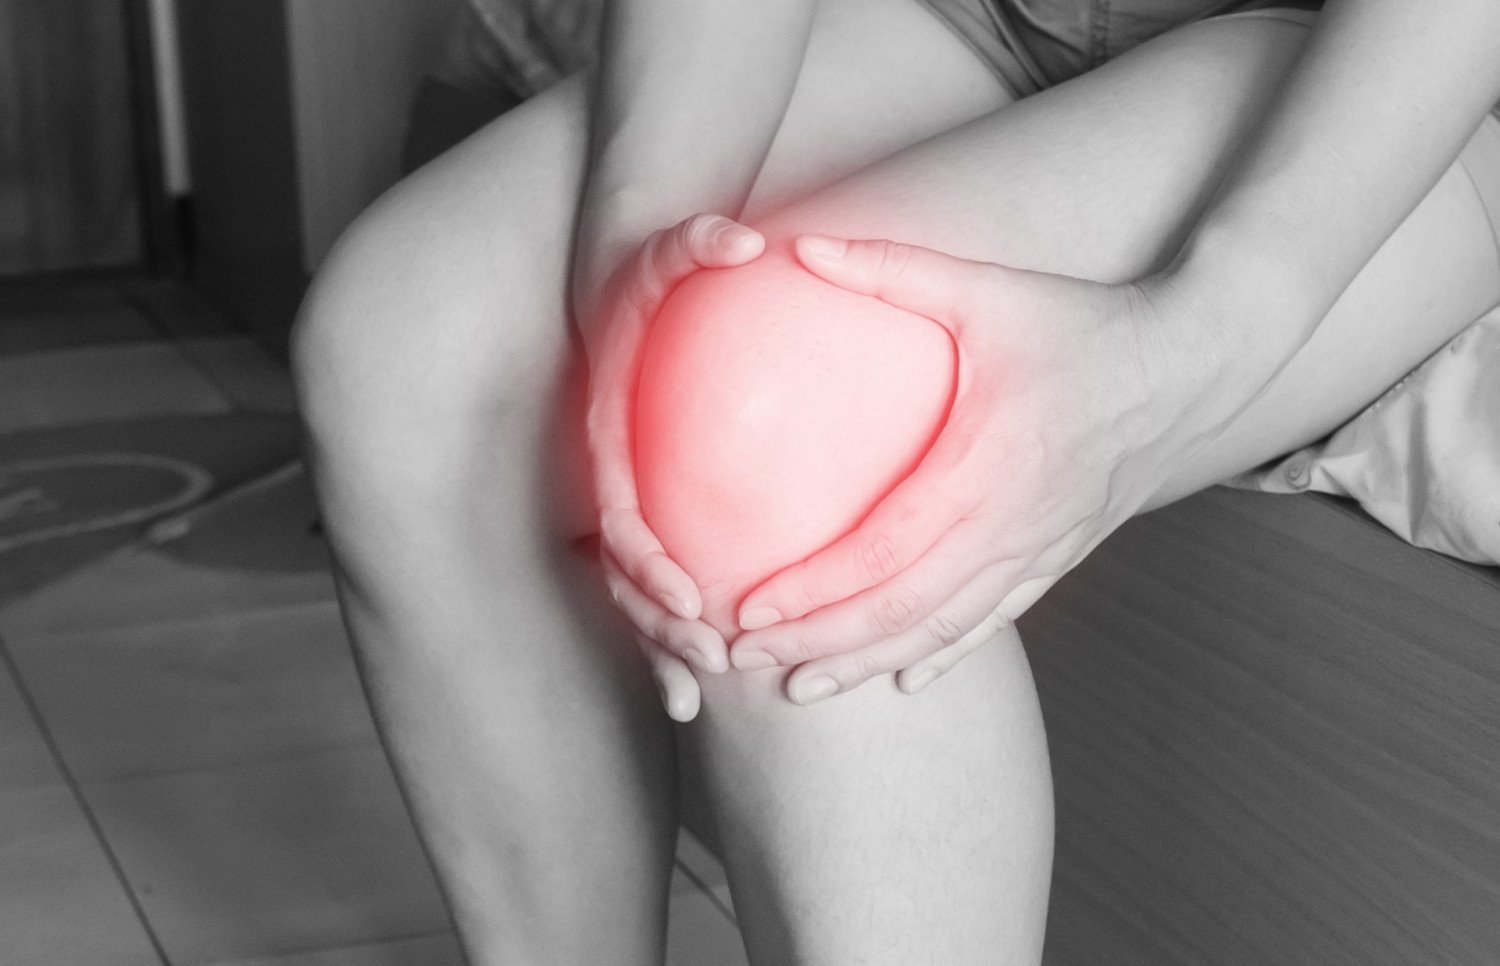 Are sprains and strains the same?